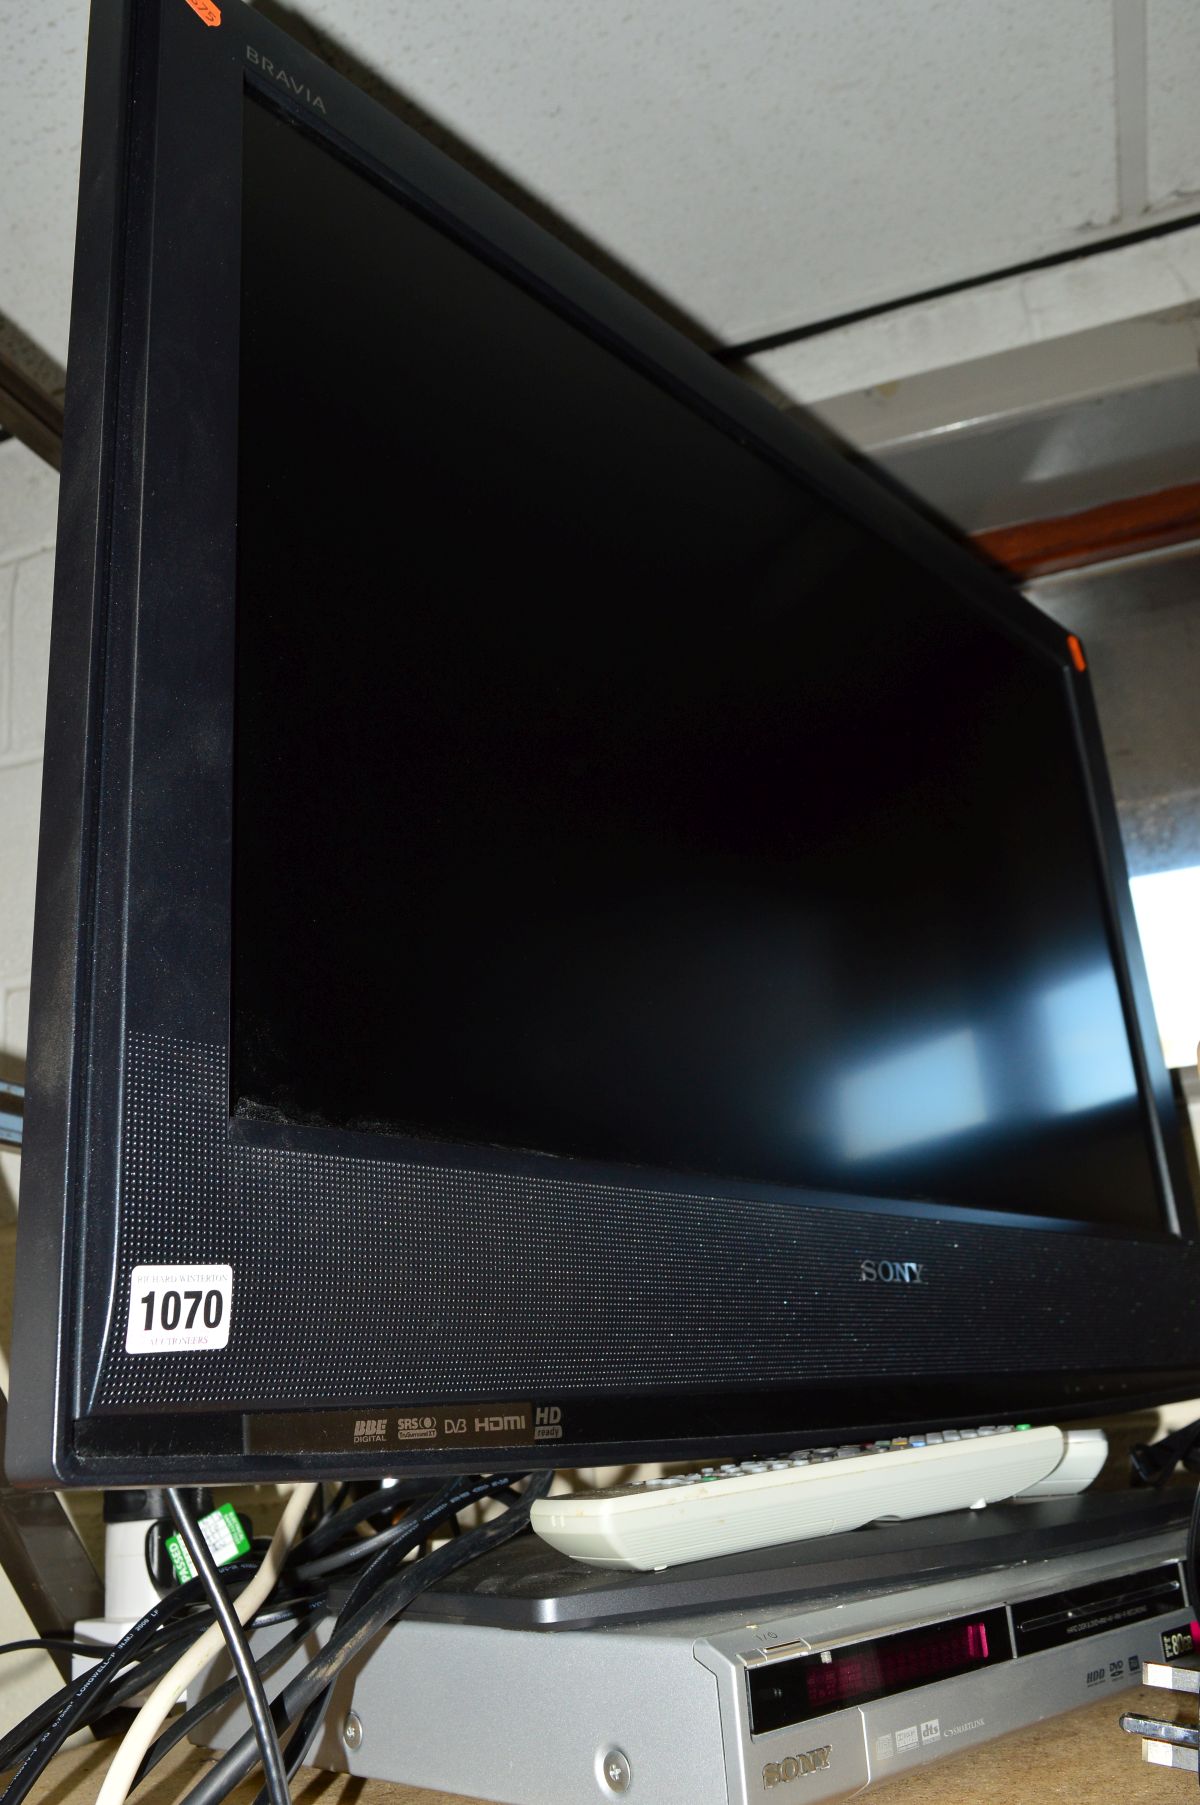 A SONY 32' LCD TV with a Sony hard drive recorder, two tier glass TV stand (positioned opposite to